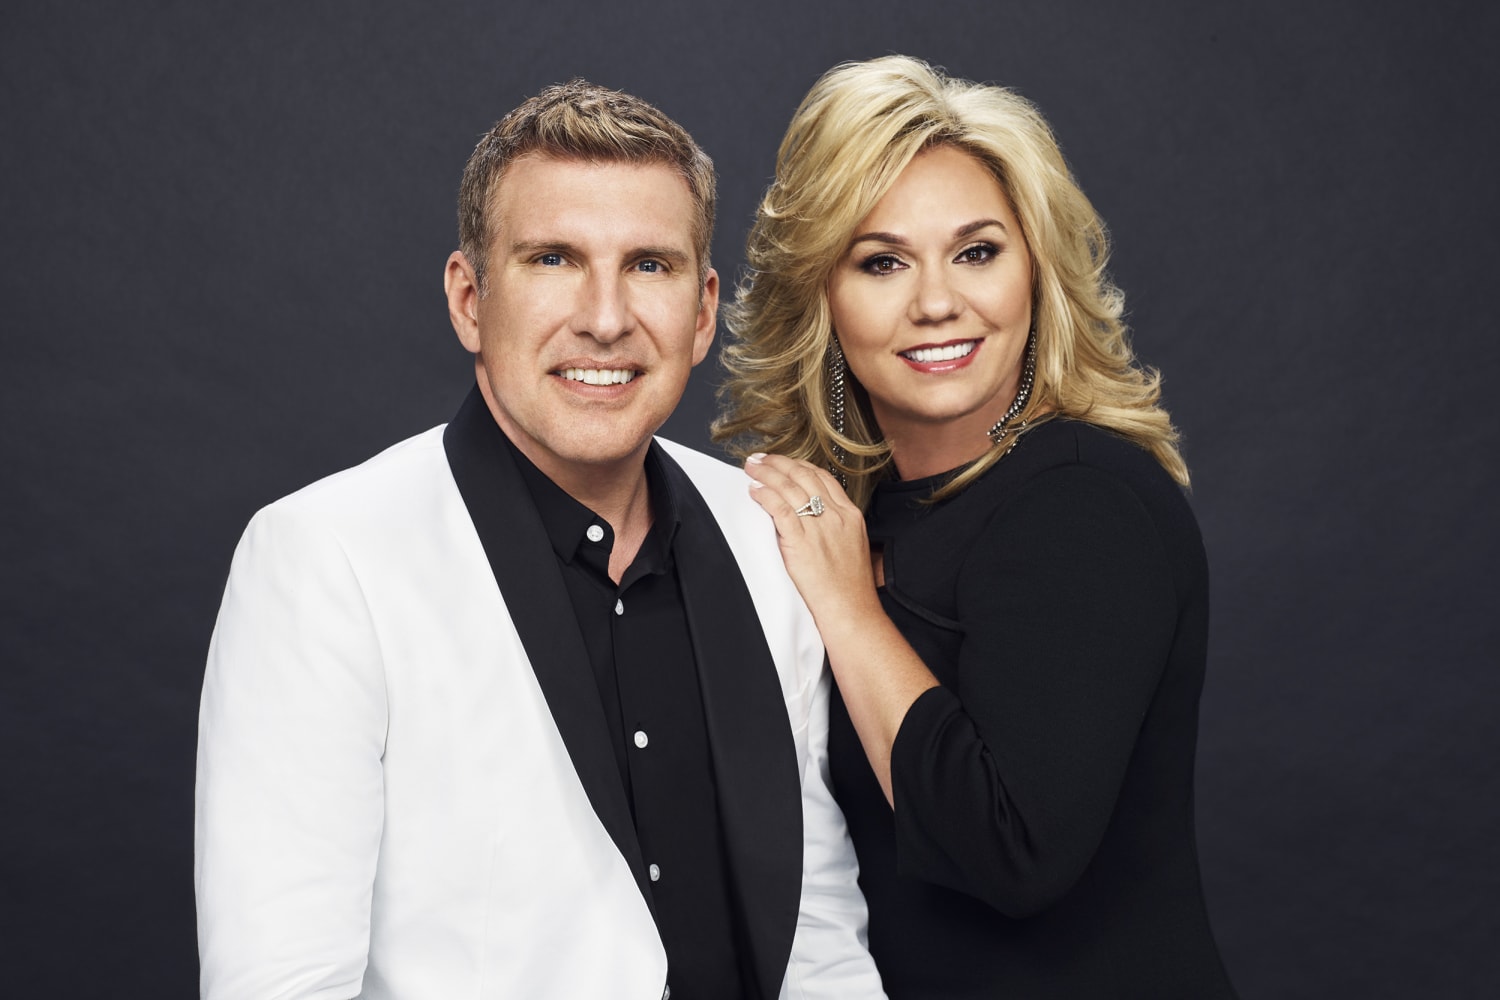 Reality TV Characters Todd and Julie Chrisley Claim That Their Christian Faith Drives Them Appeal Their Jail Sentences for  Million Tax Fraud